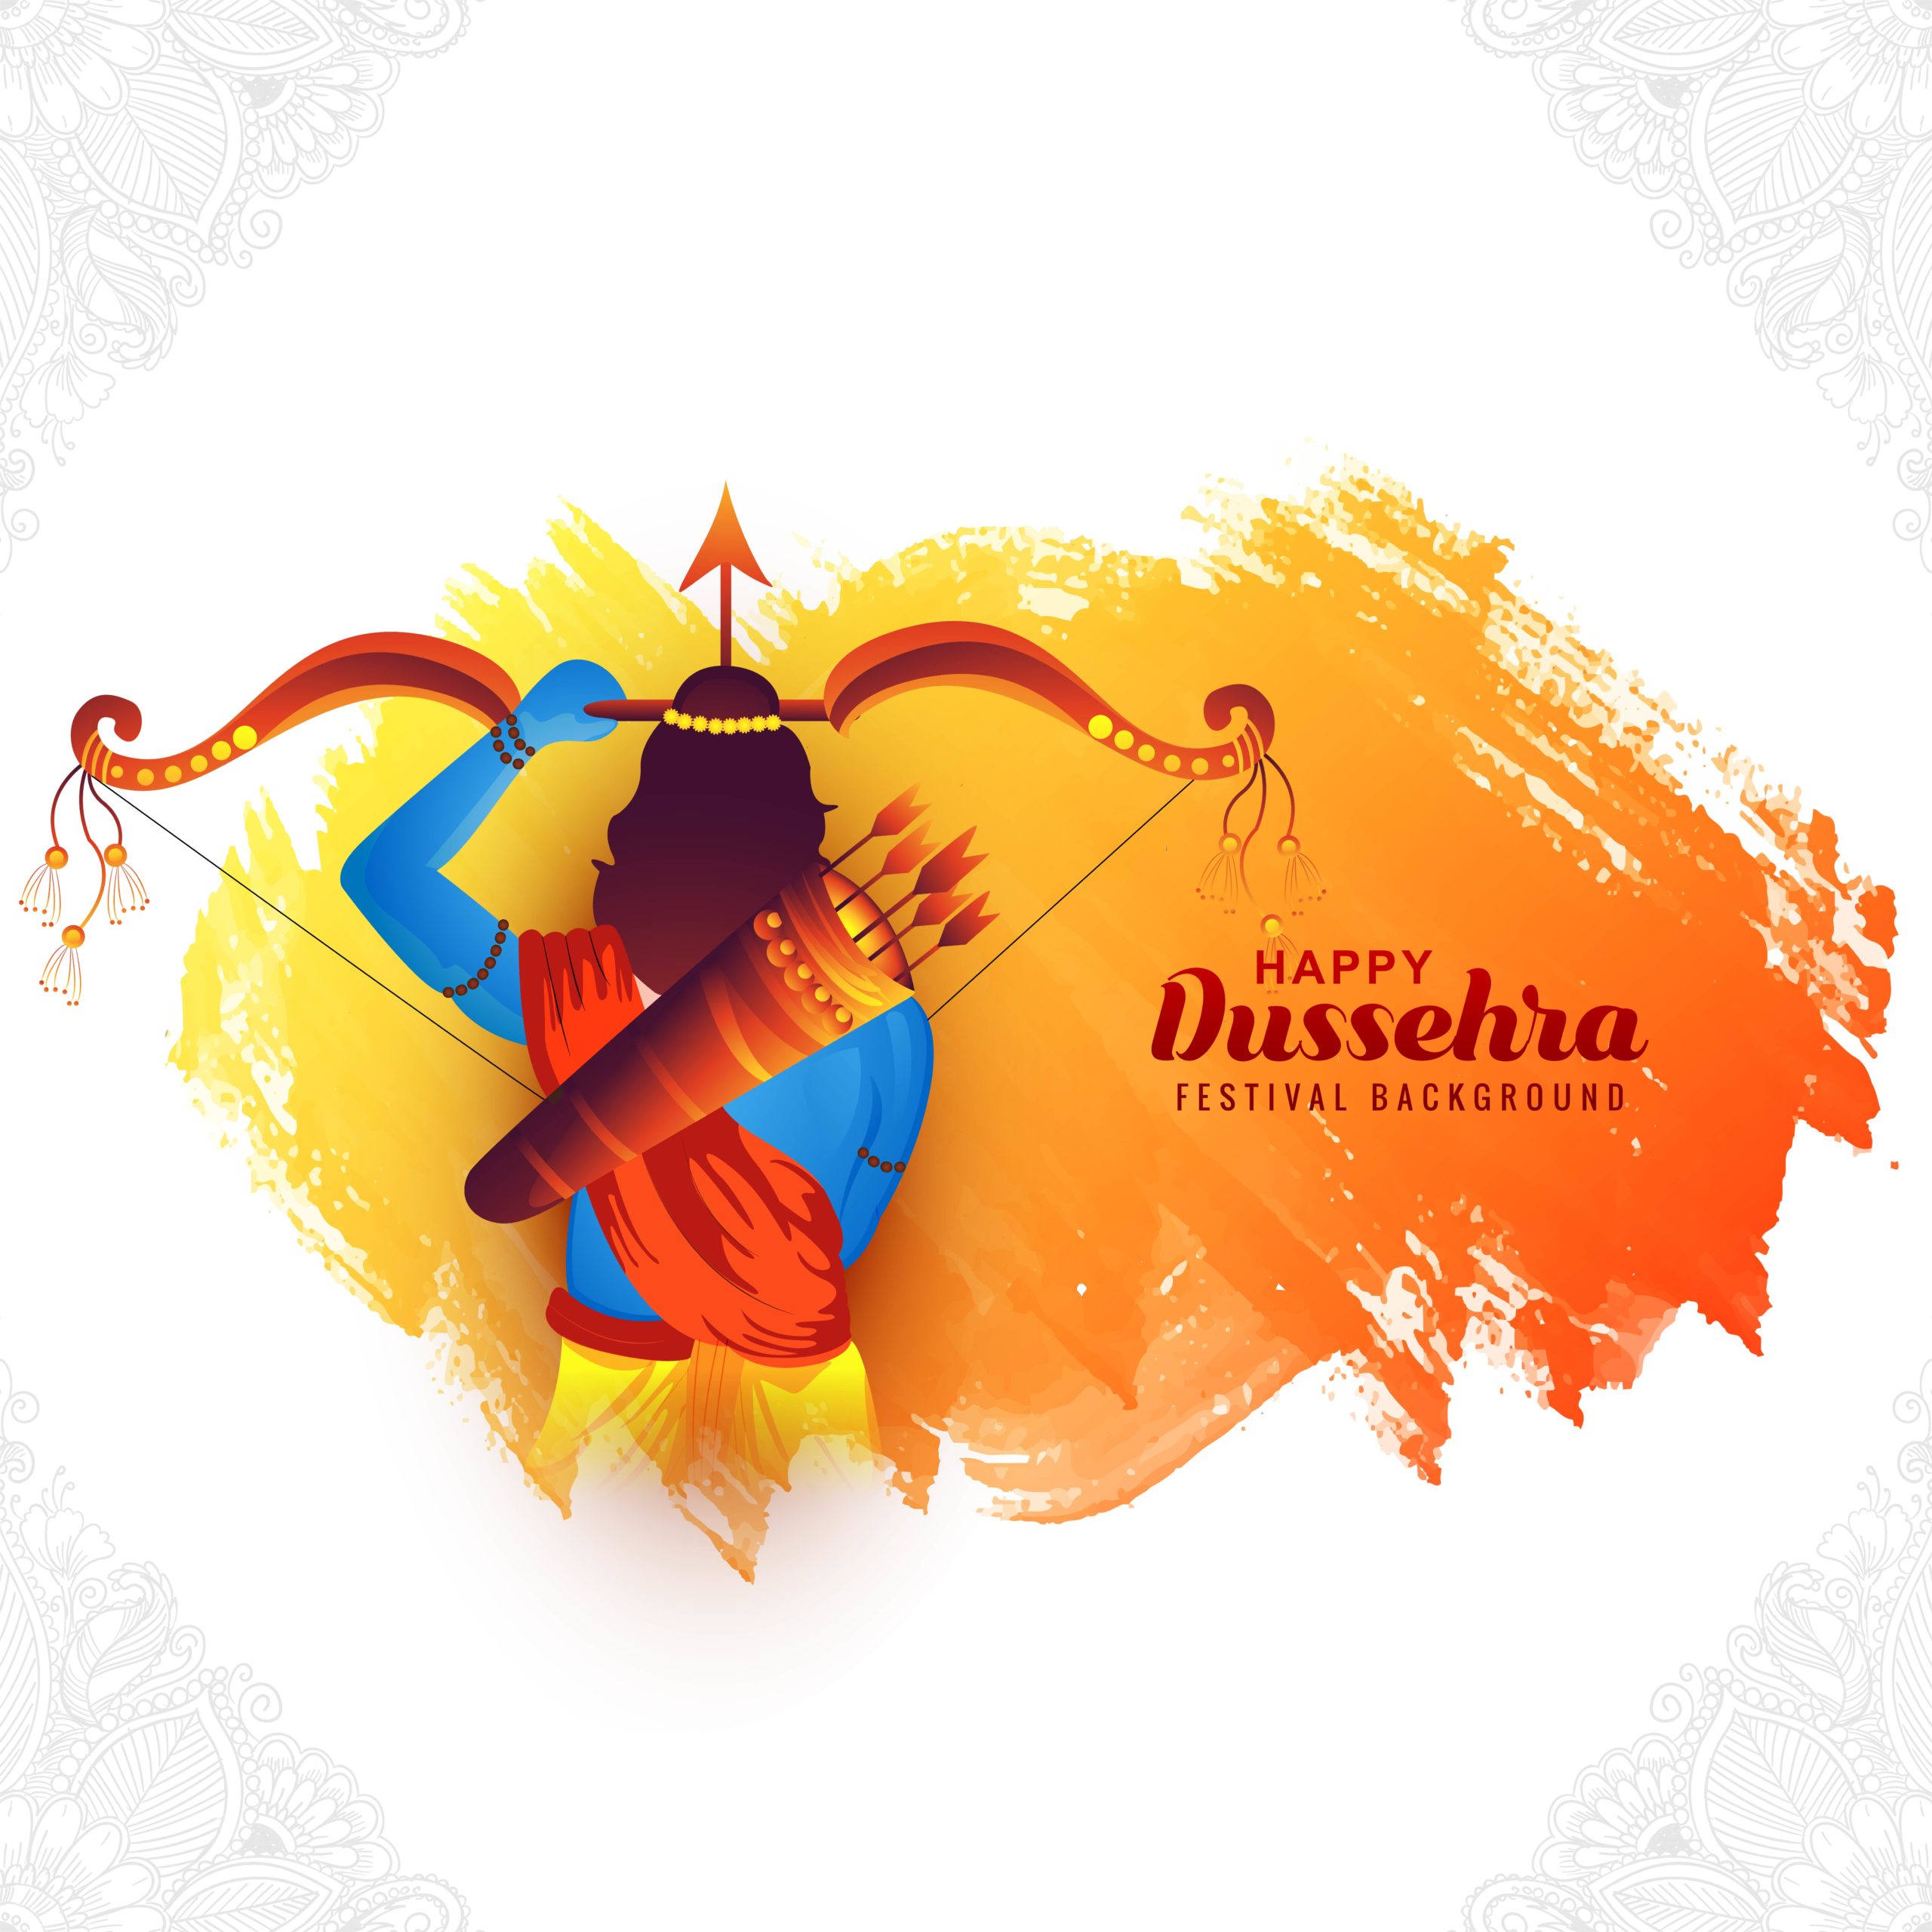 Dussehra 2022: Top Wishes, Greetings, Quotes, HD Images, Messages, Shayari,  Video, Drawings, Posters, and Banners to